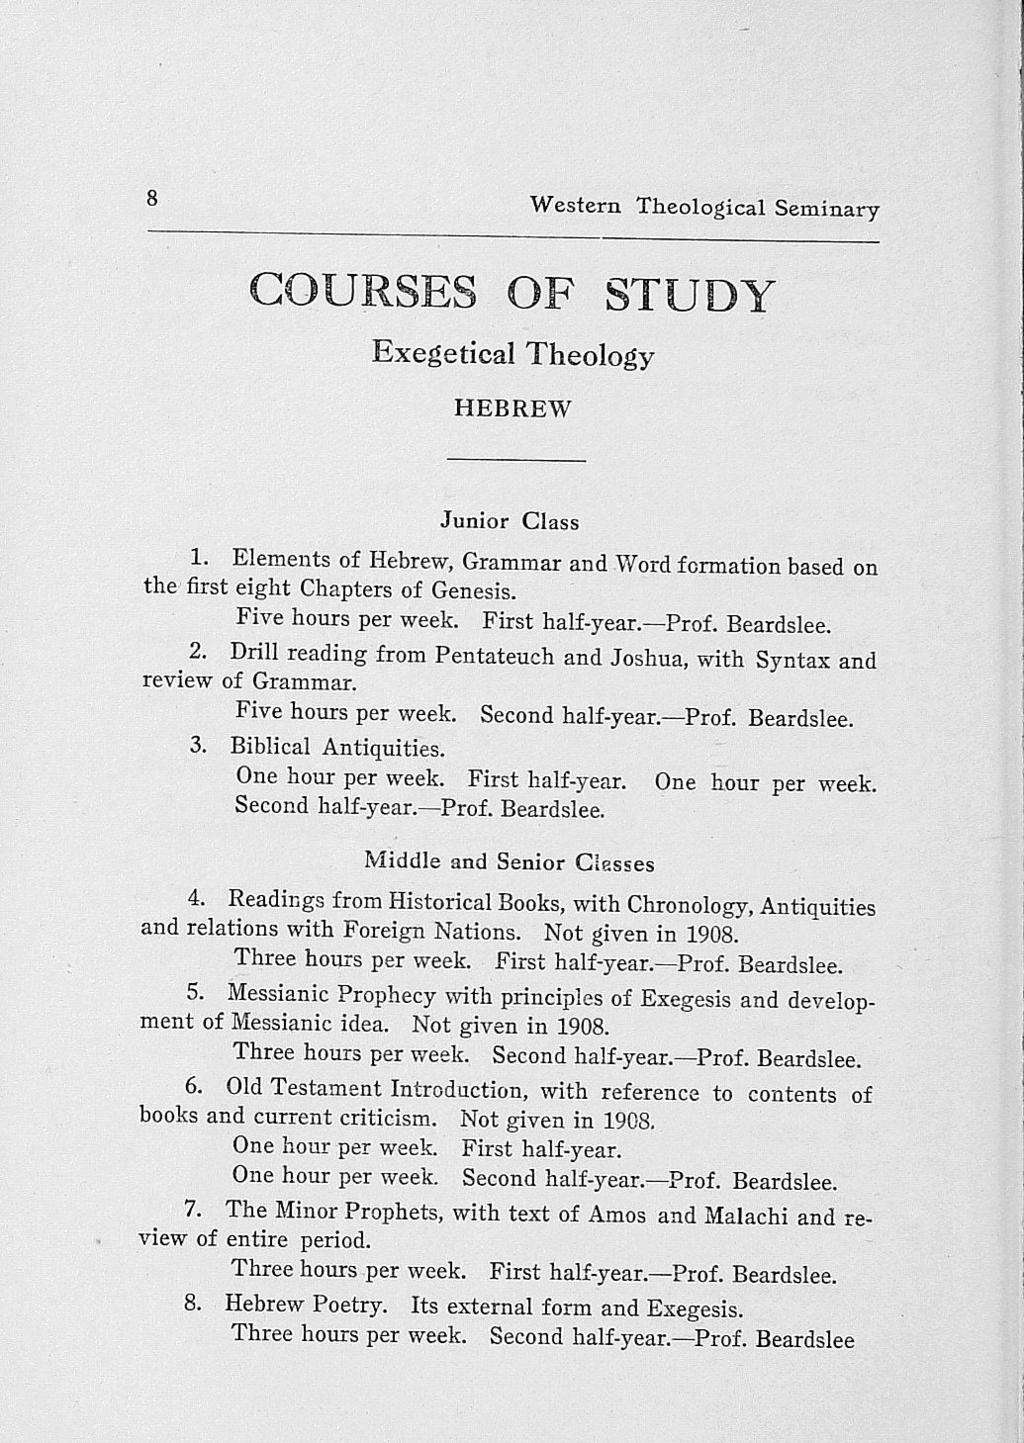 8 Western Theological Seminary COURSES OF STUDY Exegetical Theology HEBREW Junior Class 1. Elements of Hebrew, Grammar and Word formation based on the first eight Chapters of Genesis.